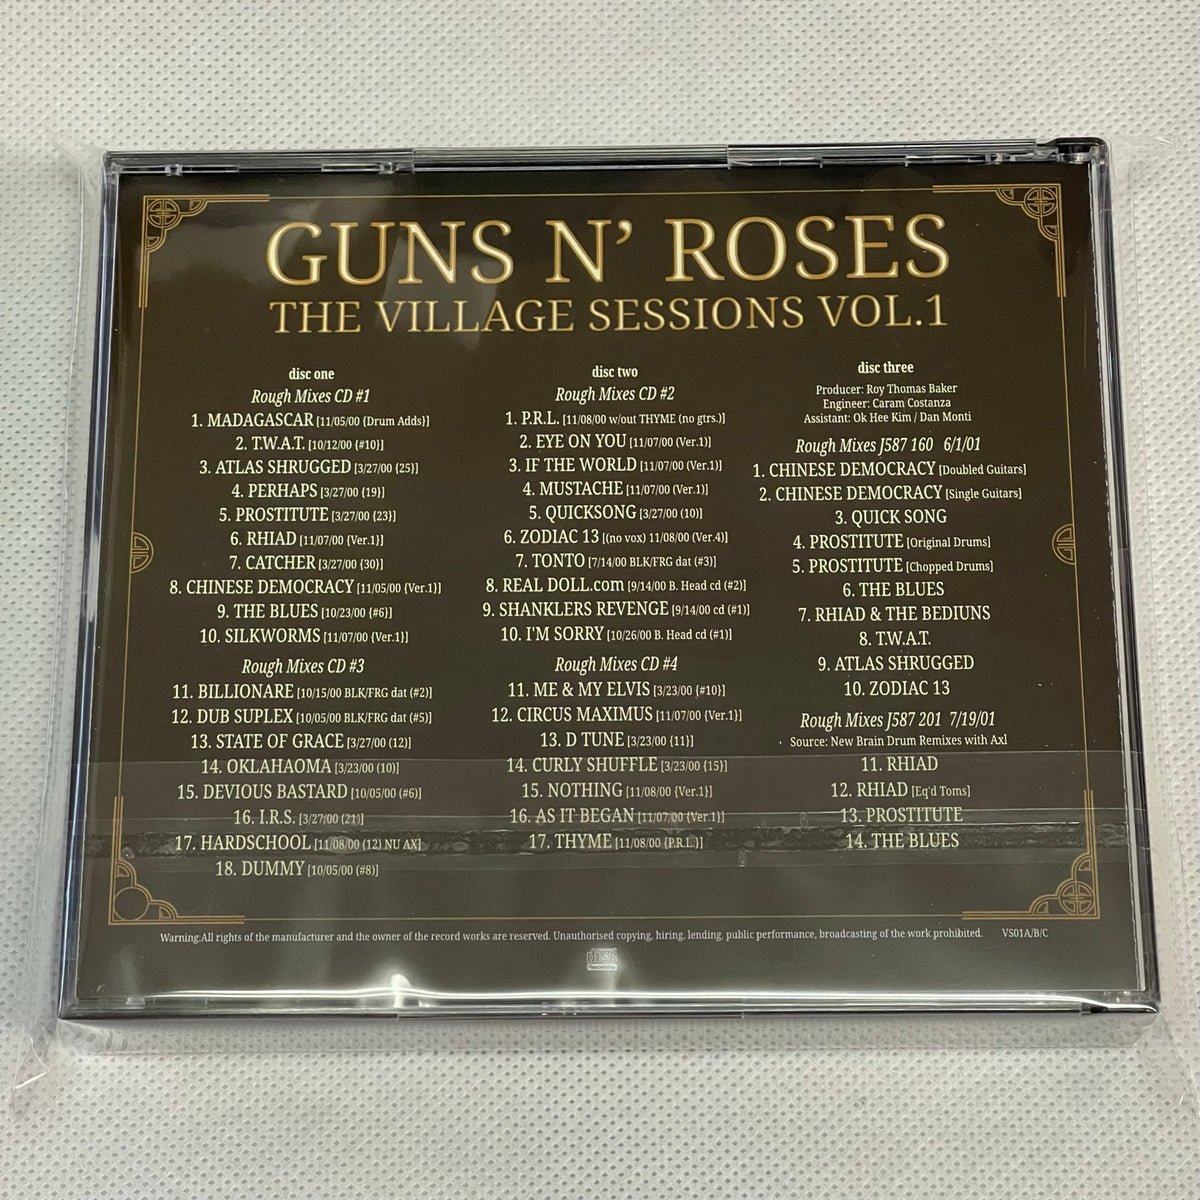 GUNS N' ROSES - THE VILLAGE SESSIONS VOL.1 (3CDR) – Acme Hot Disc